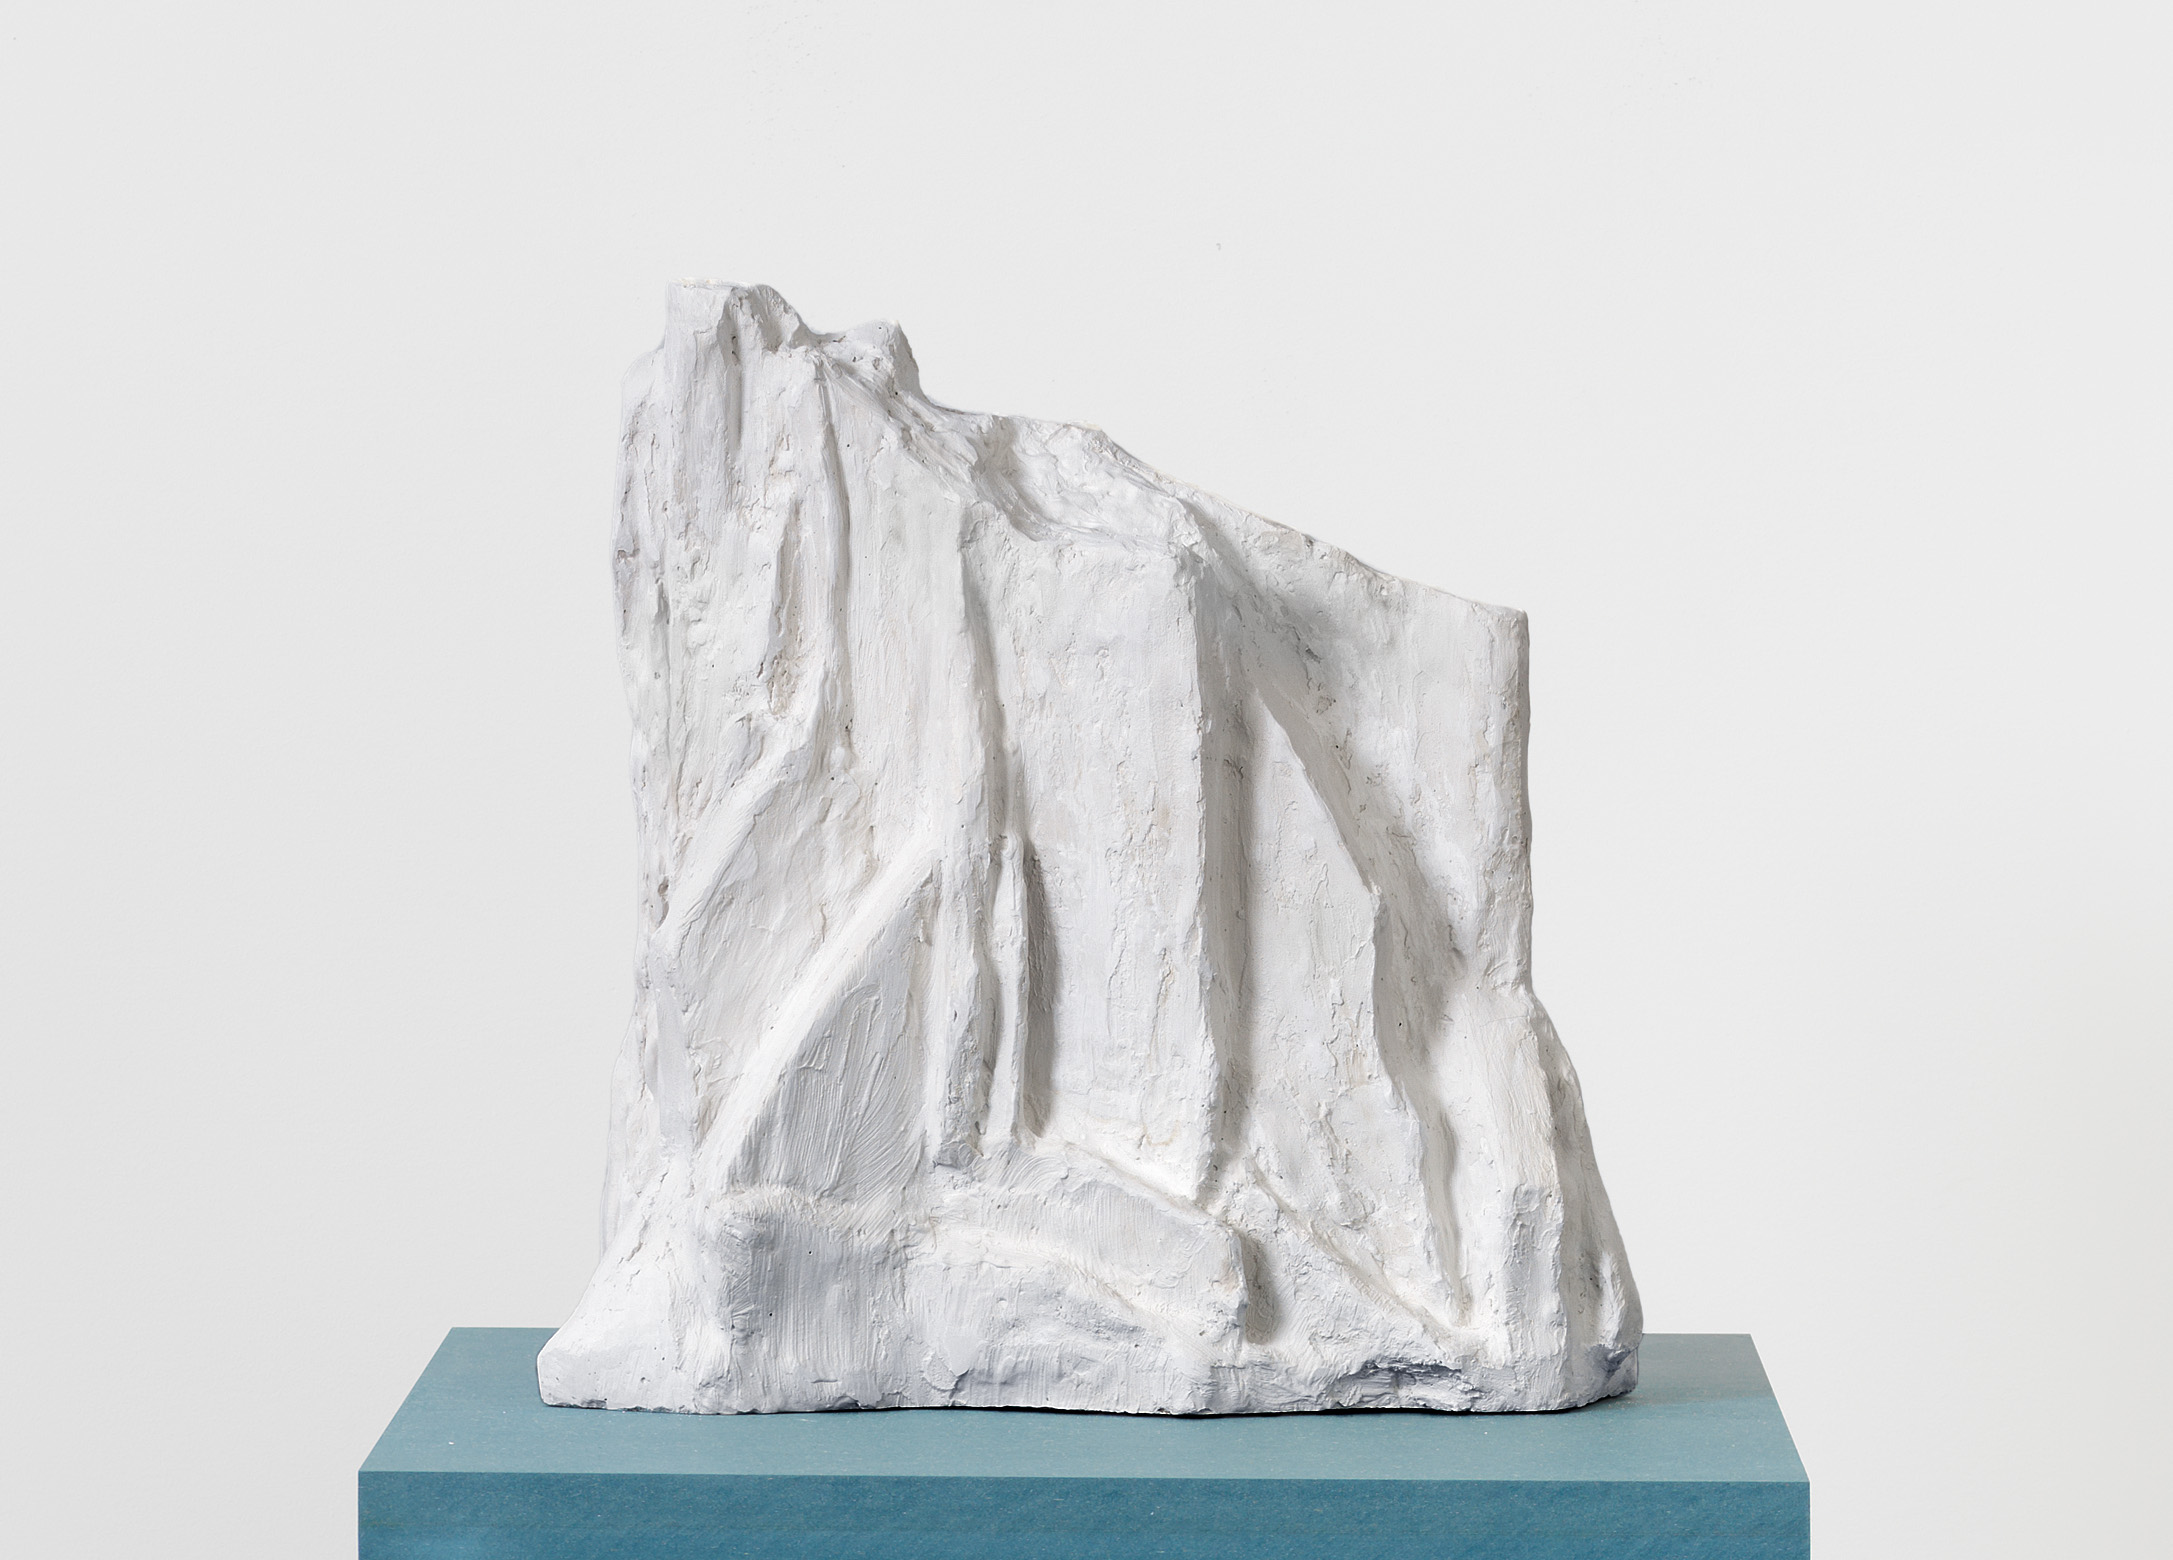 Jennifer Bolande, Drift 2, 2023, Plaster, wood, wire mesh on blue pigmented high-density composite plinth and base, 61 1/2 x 20 x 20 in.